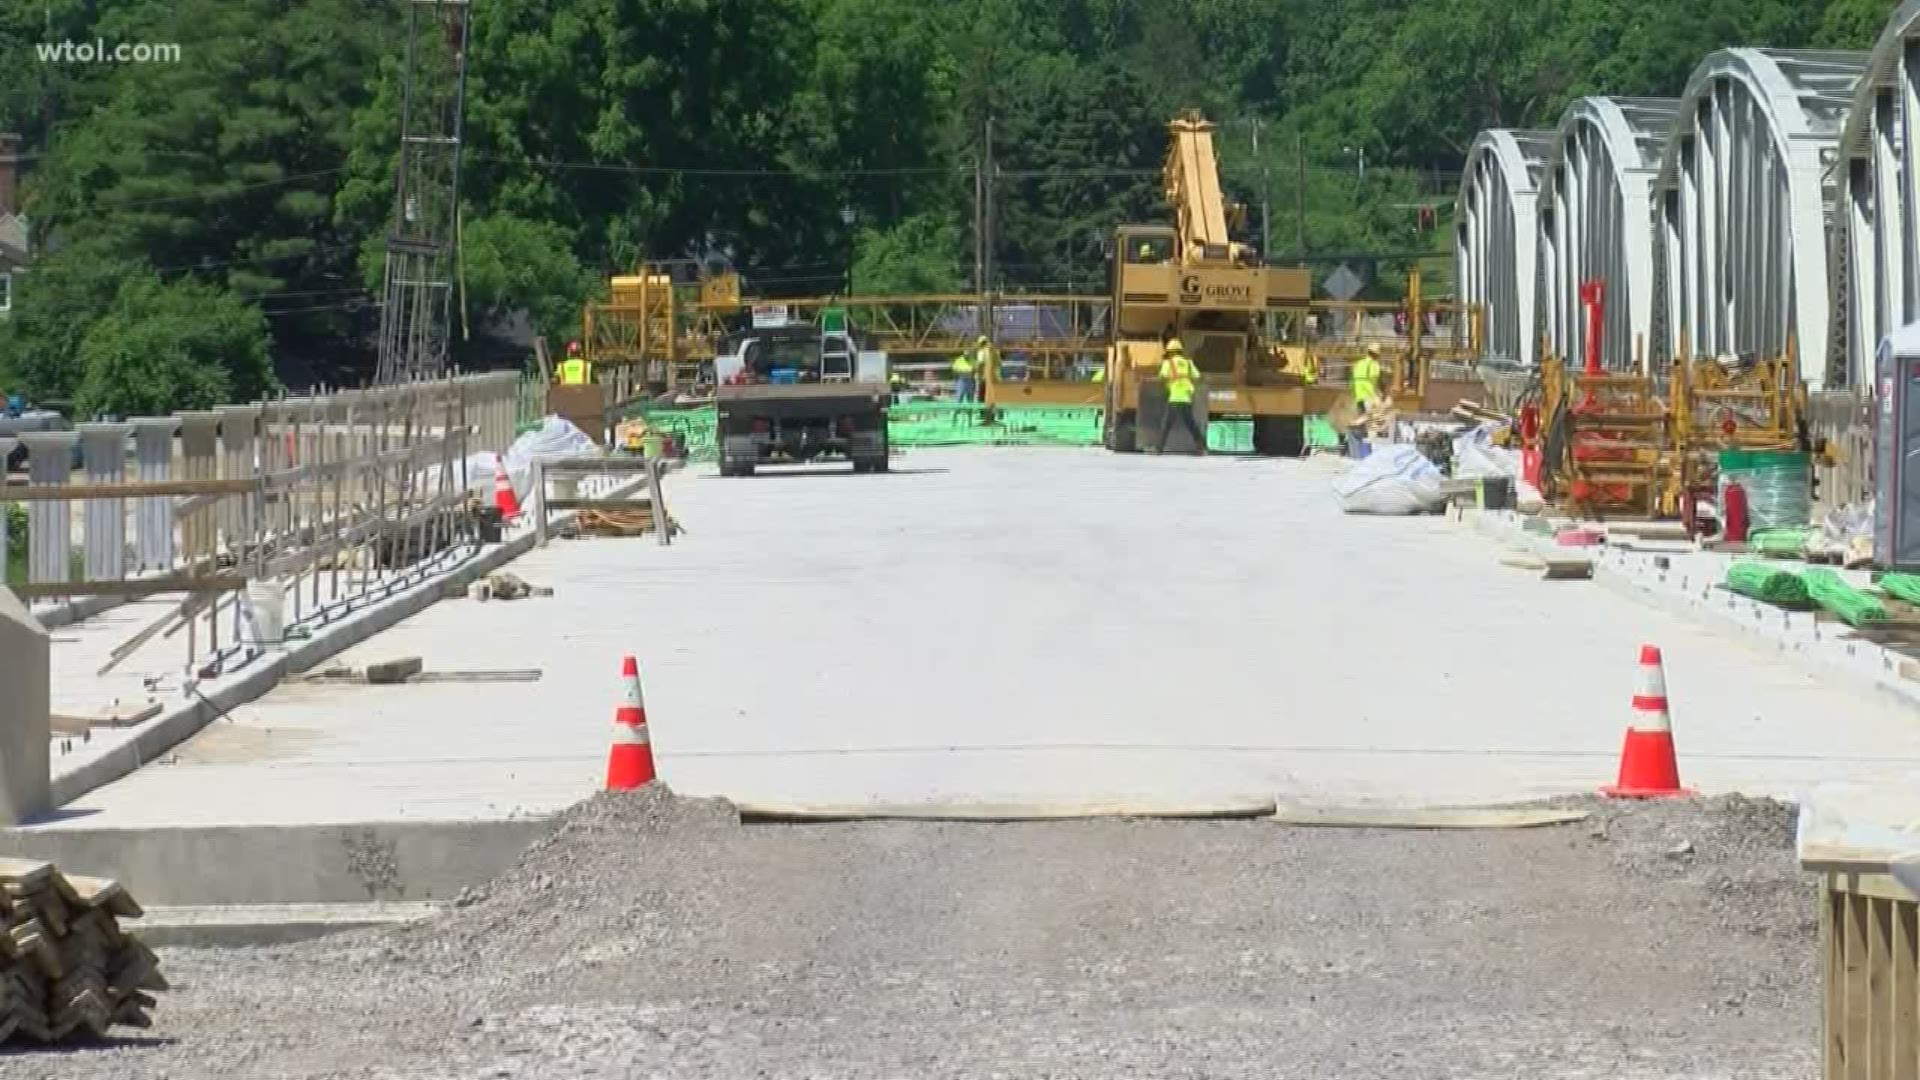 ODOT says they are hoping the bridge can be open by Christmas-time.